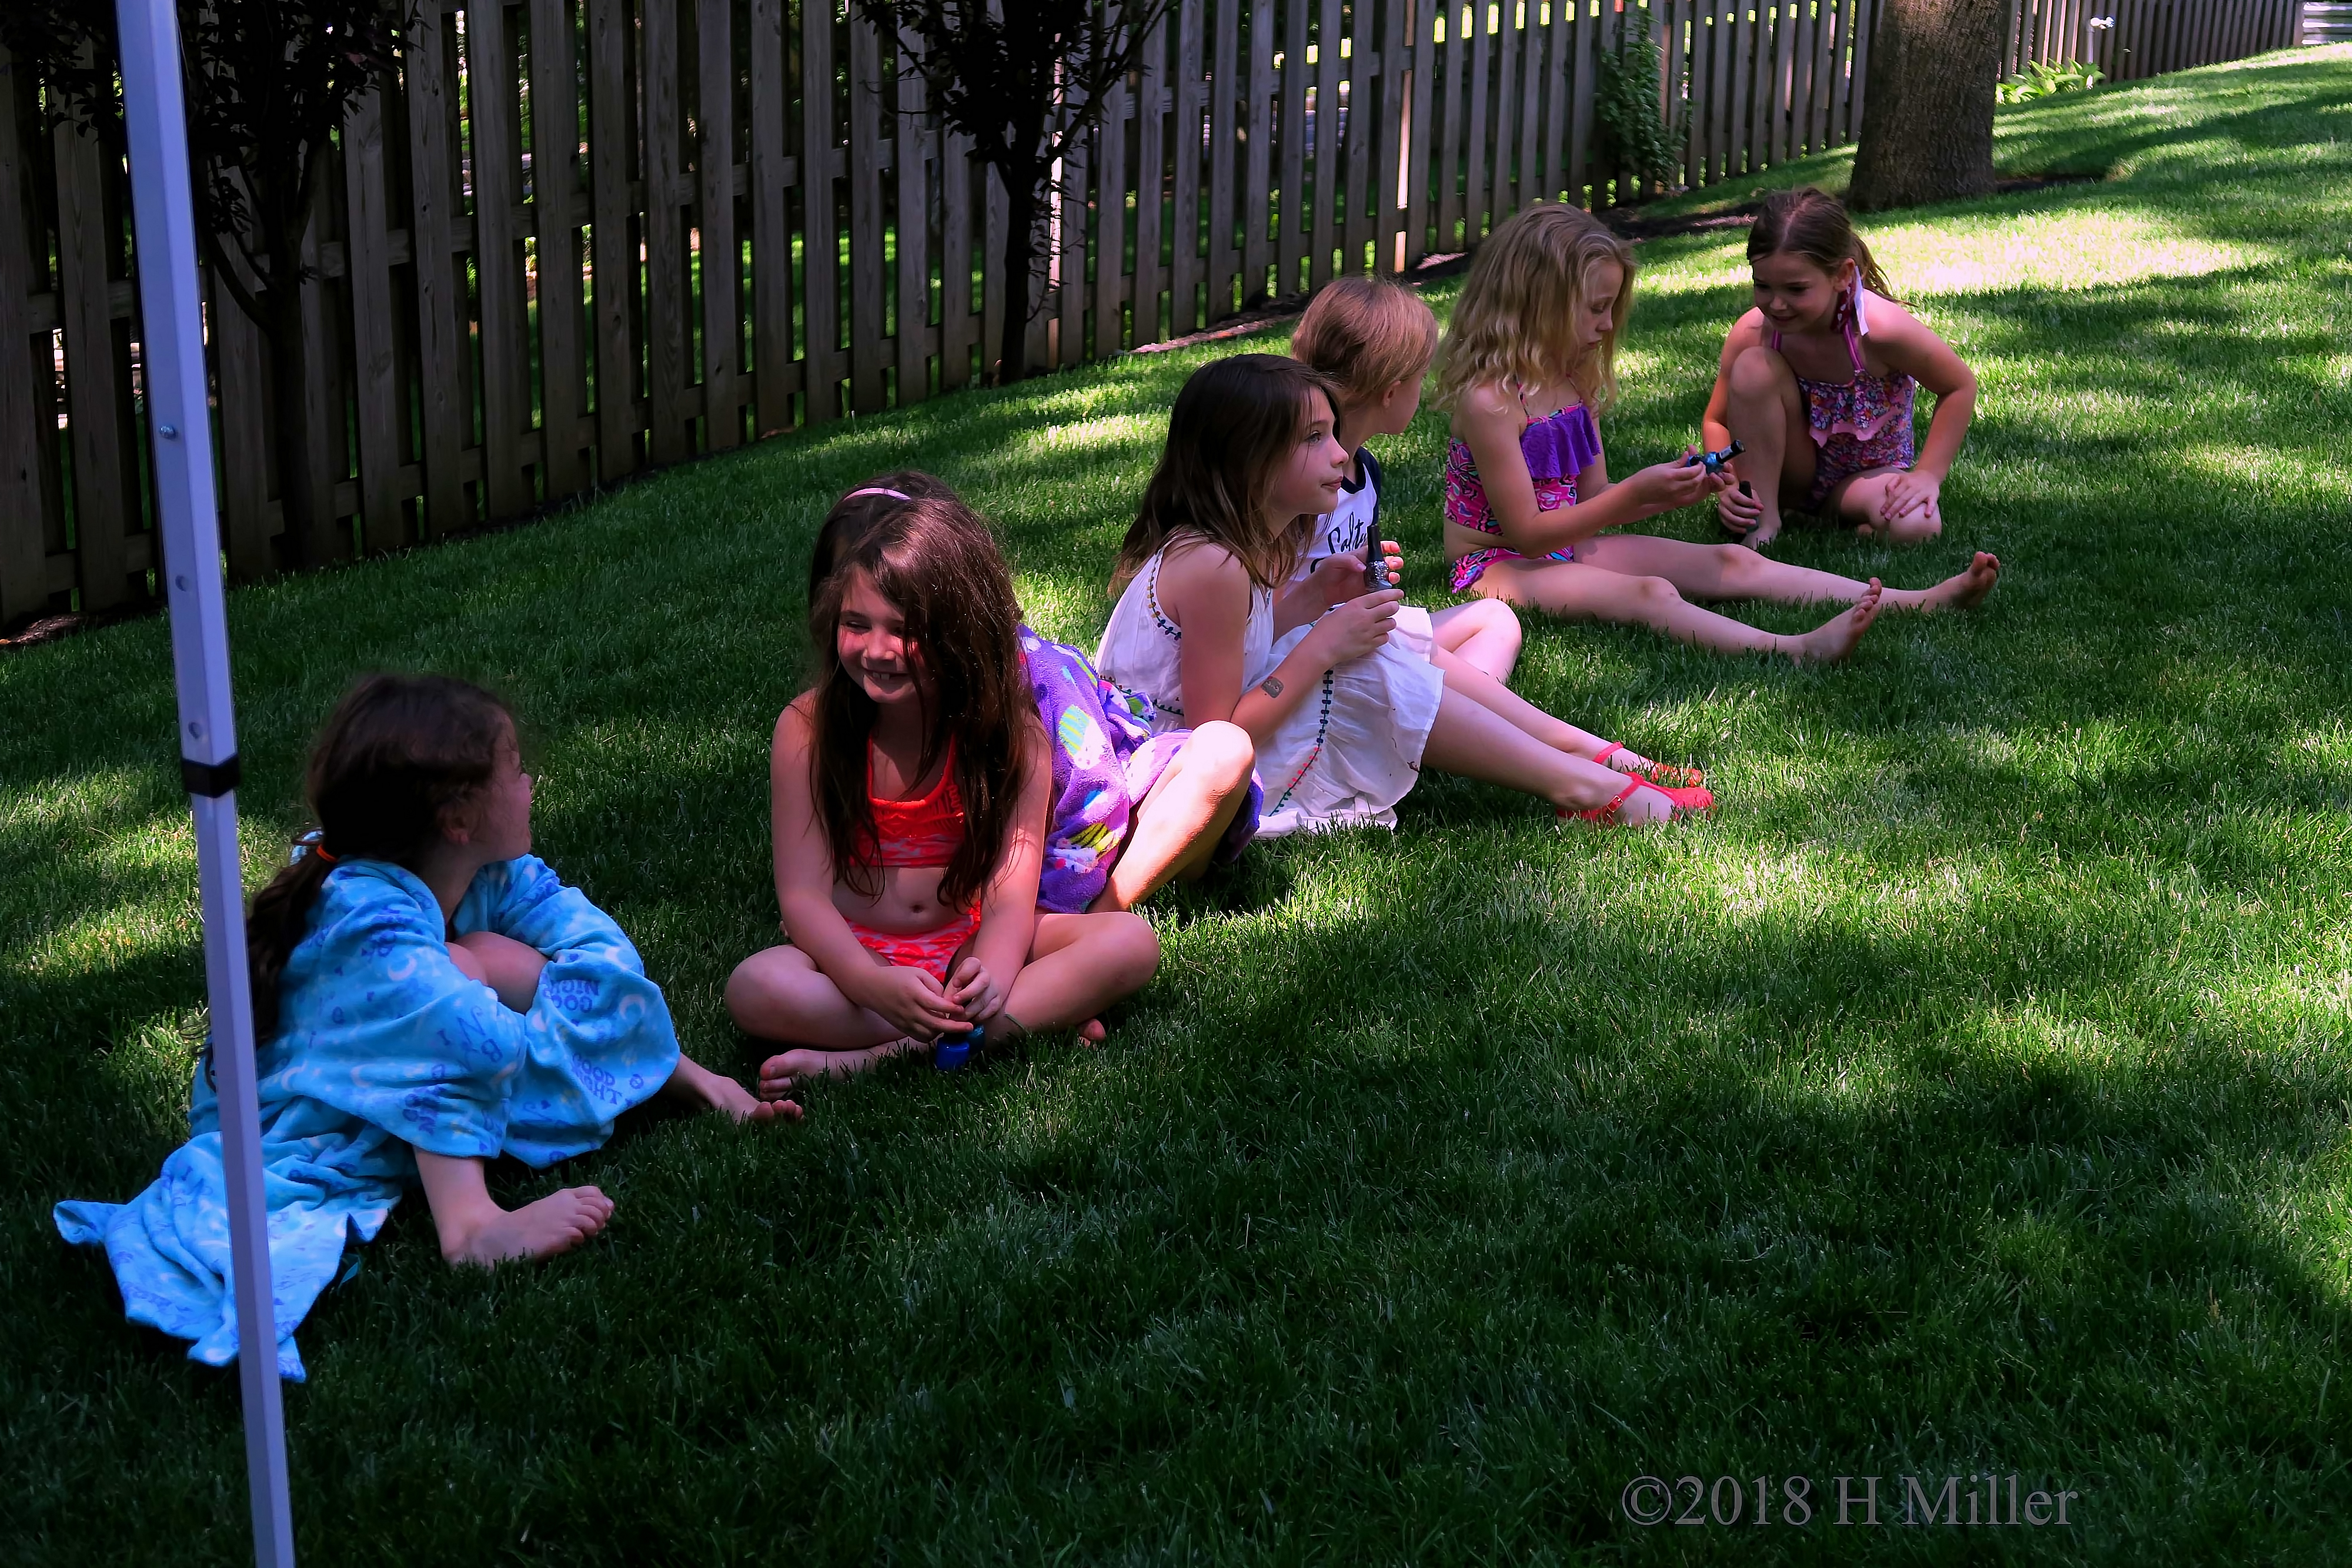 Ready For Kids Pedicures, Lined Up In The Grass 4